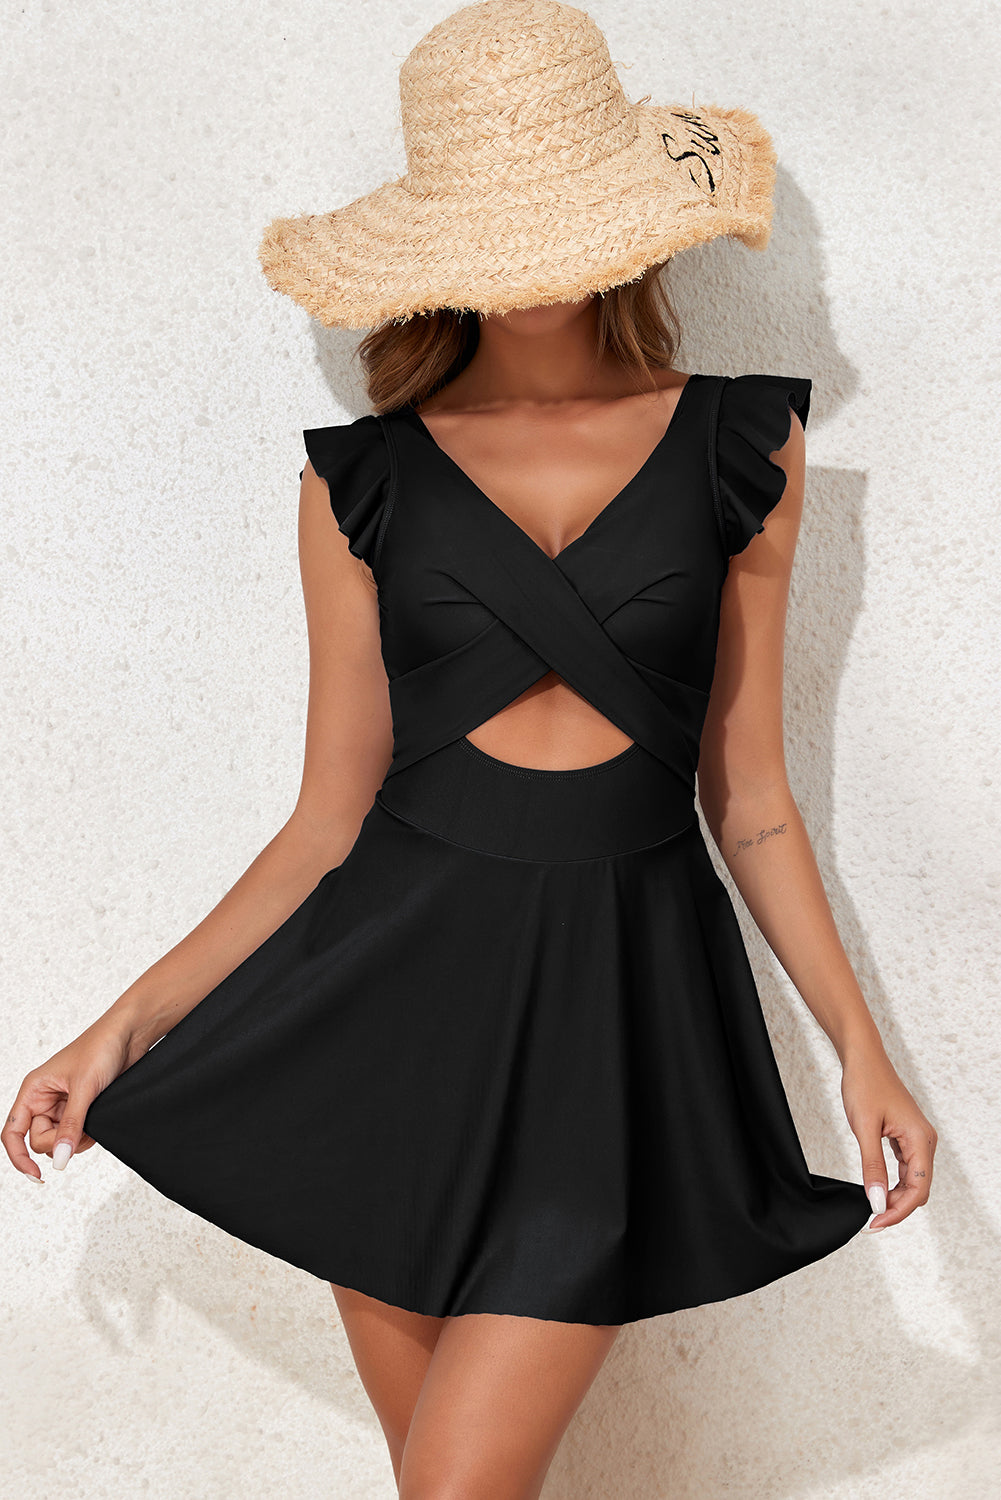 Black Cut Out Ruffle Crossed One Piece Swimsuit